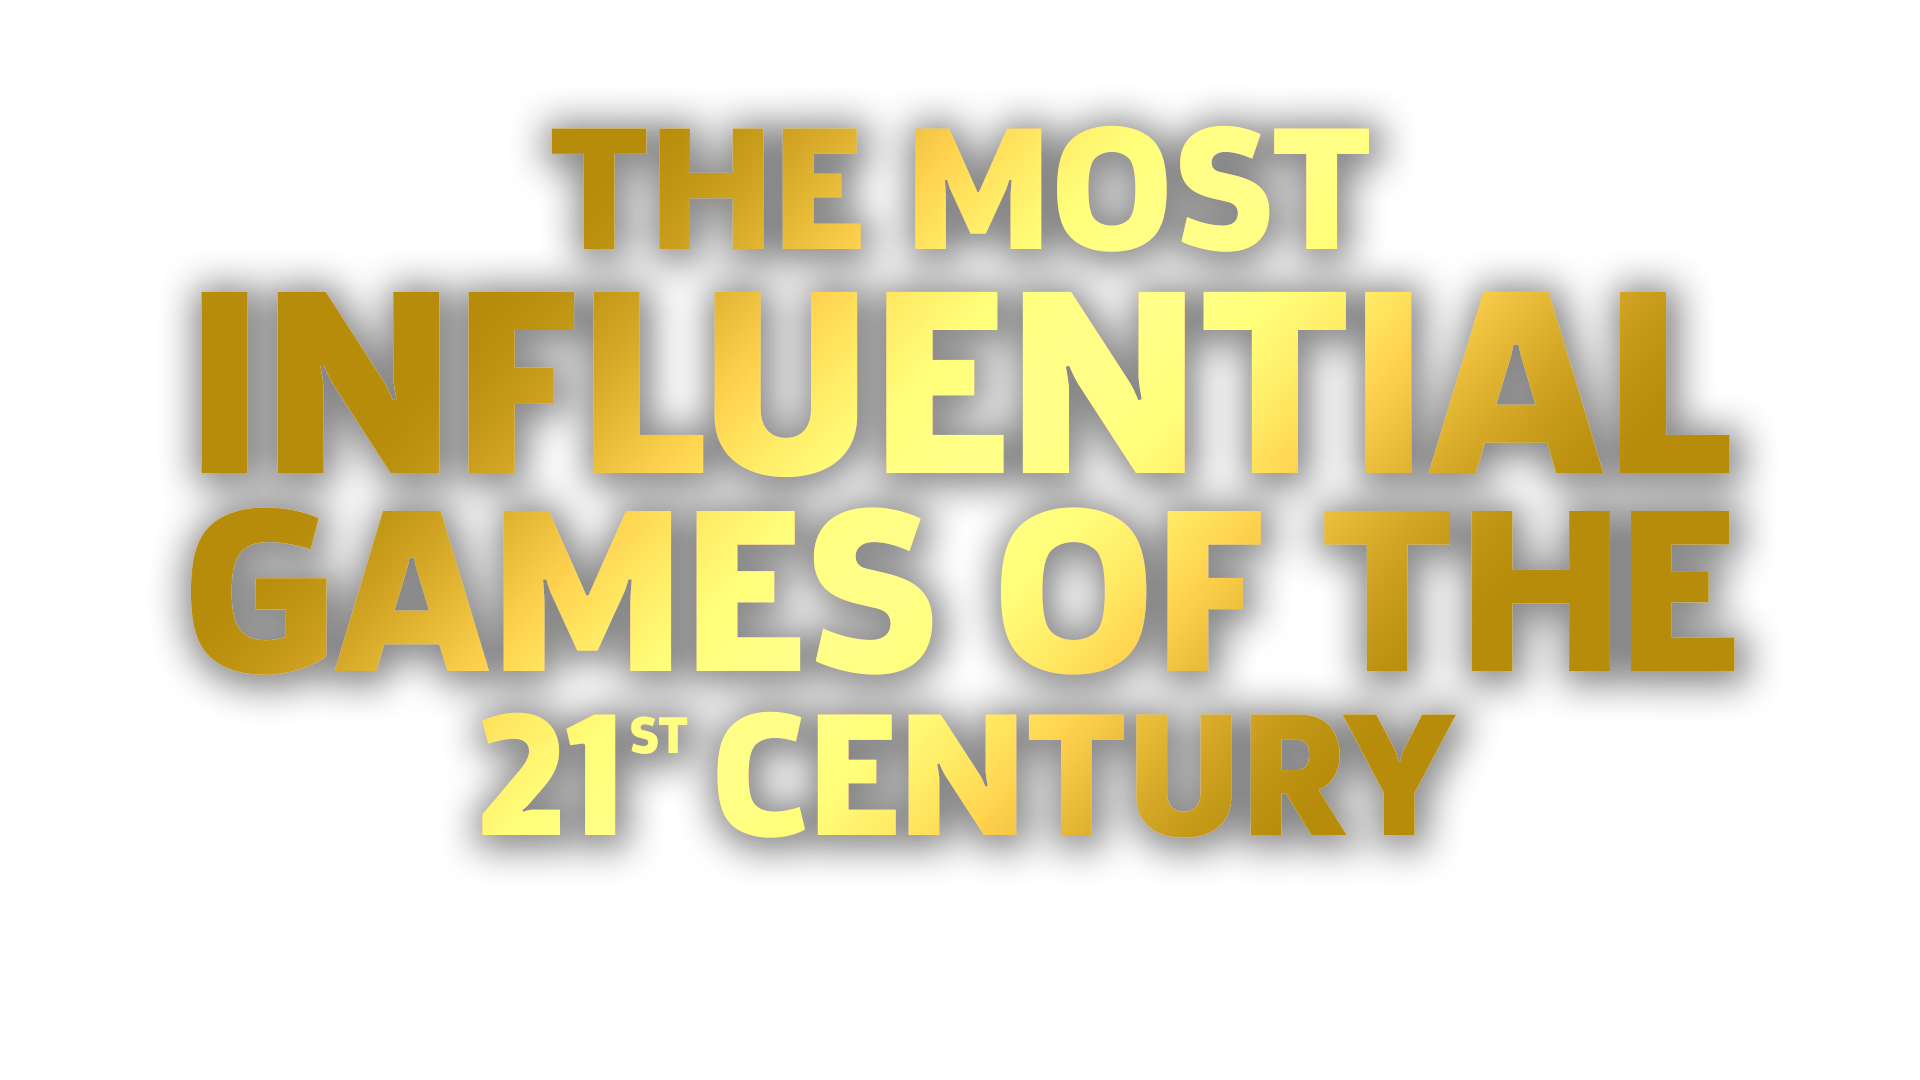 The Most Influential Games Of The 21st Century